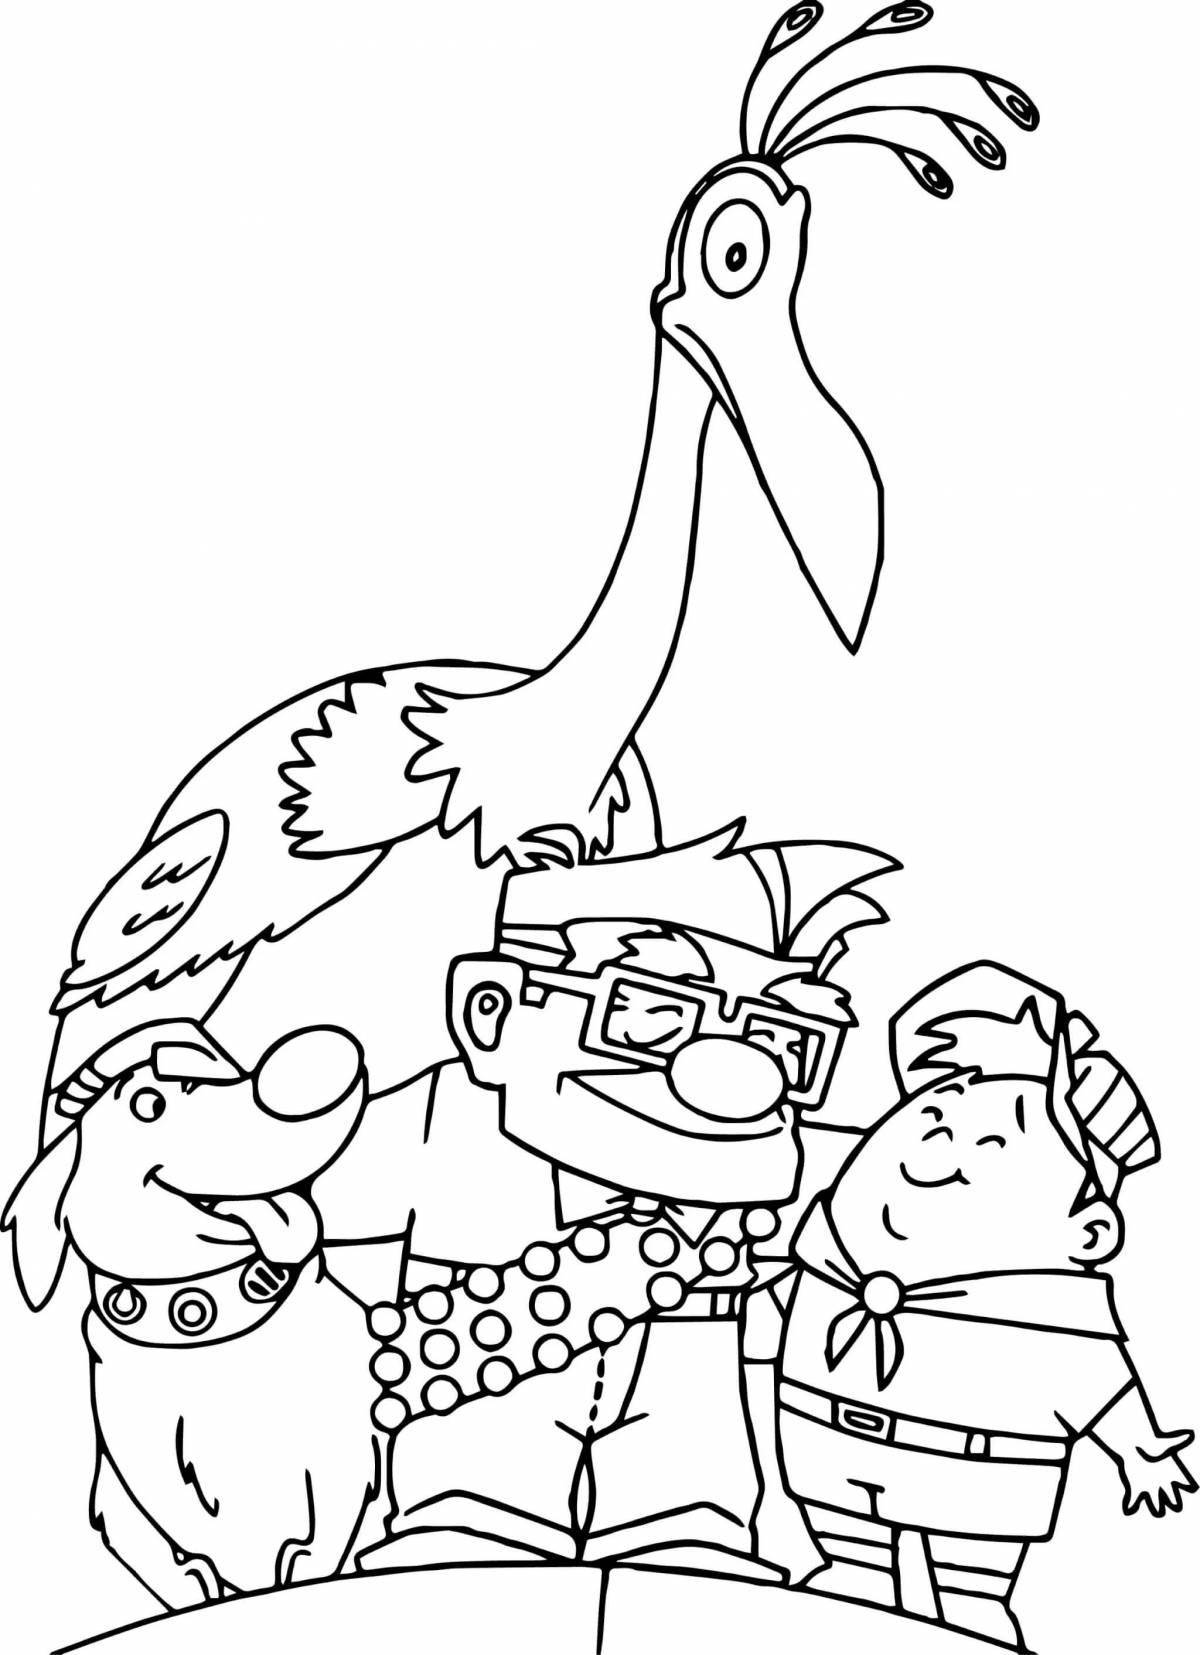 Bold coloring page up